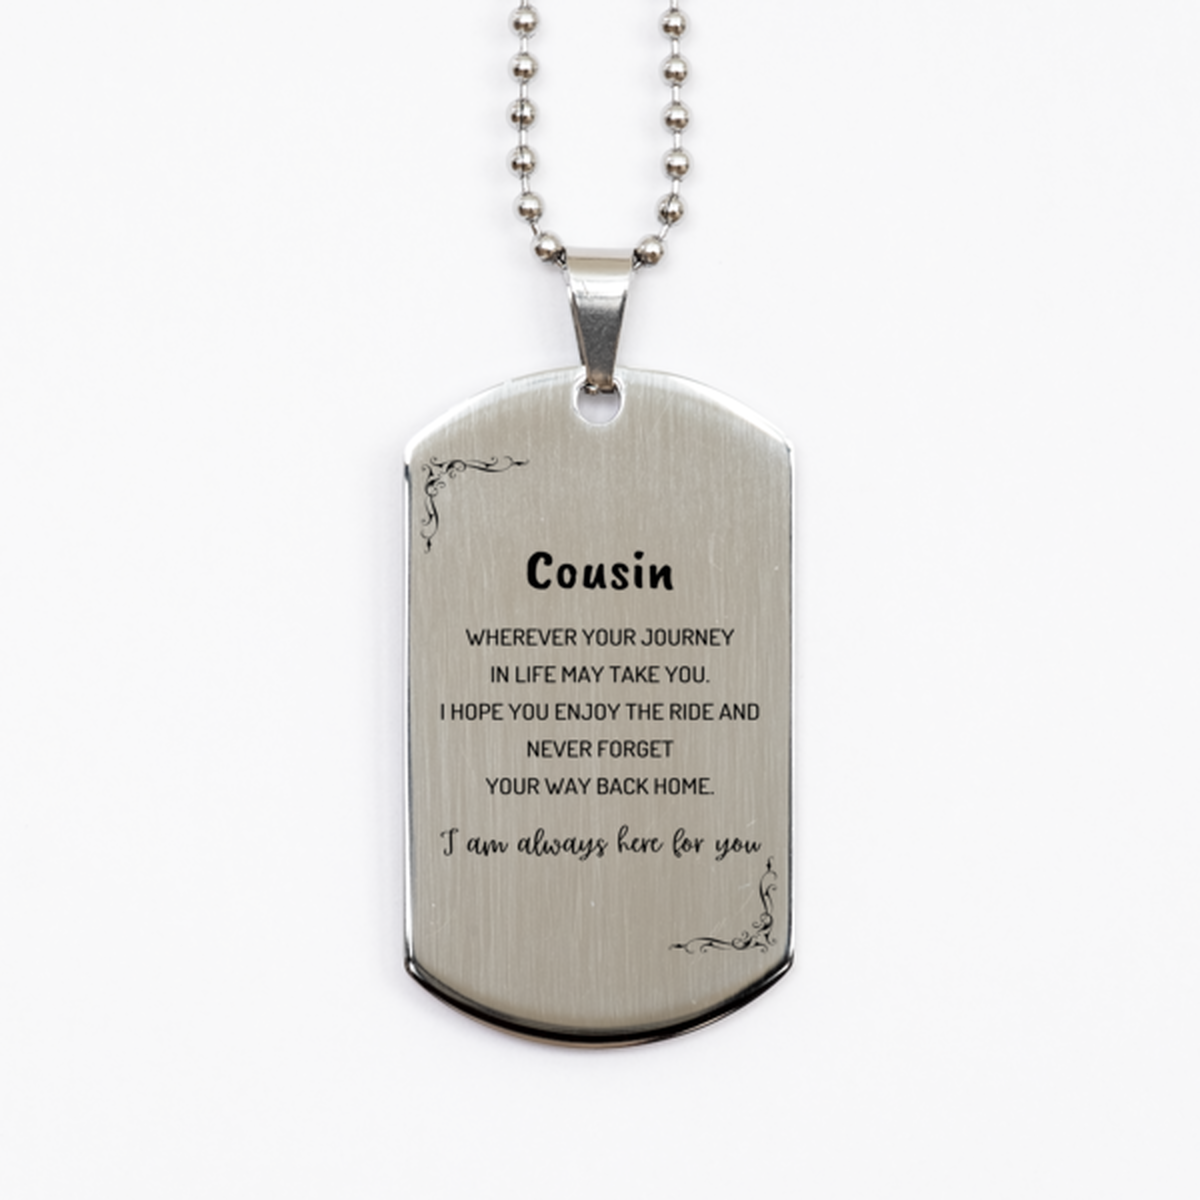 Cousin wherever your journey in life may take you, I am always here for you Cousin Silver Dog Tag, Awesome Christmas Gifts For Cousin, Cousin Birthday Gifts for Men Women Family Loved One